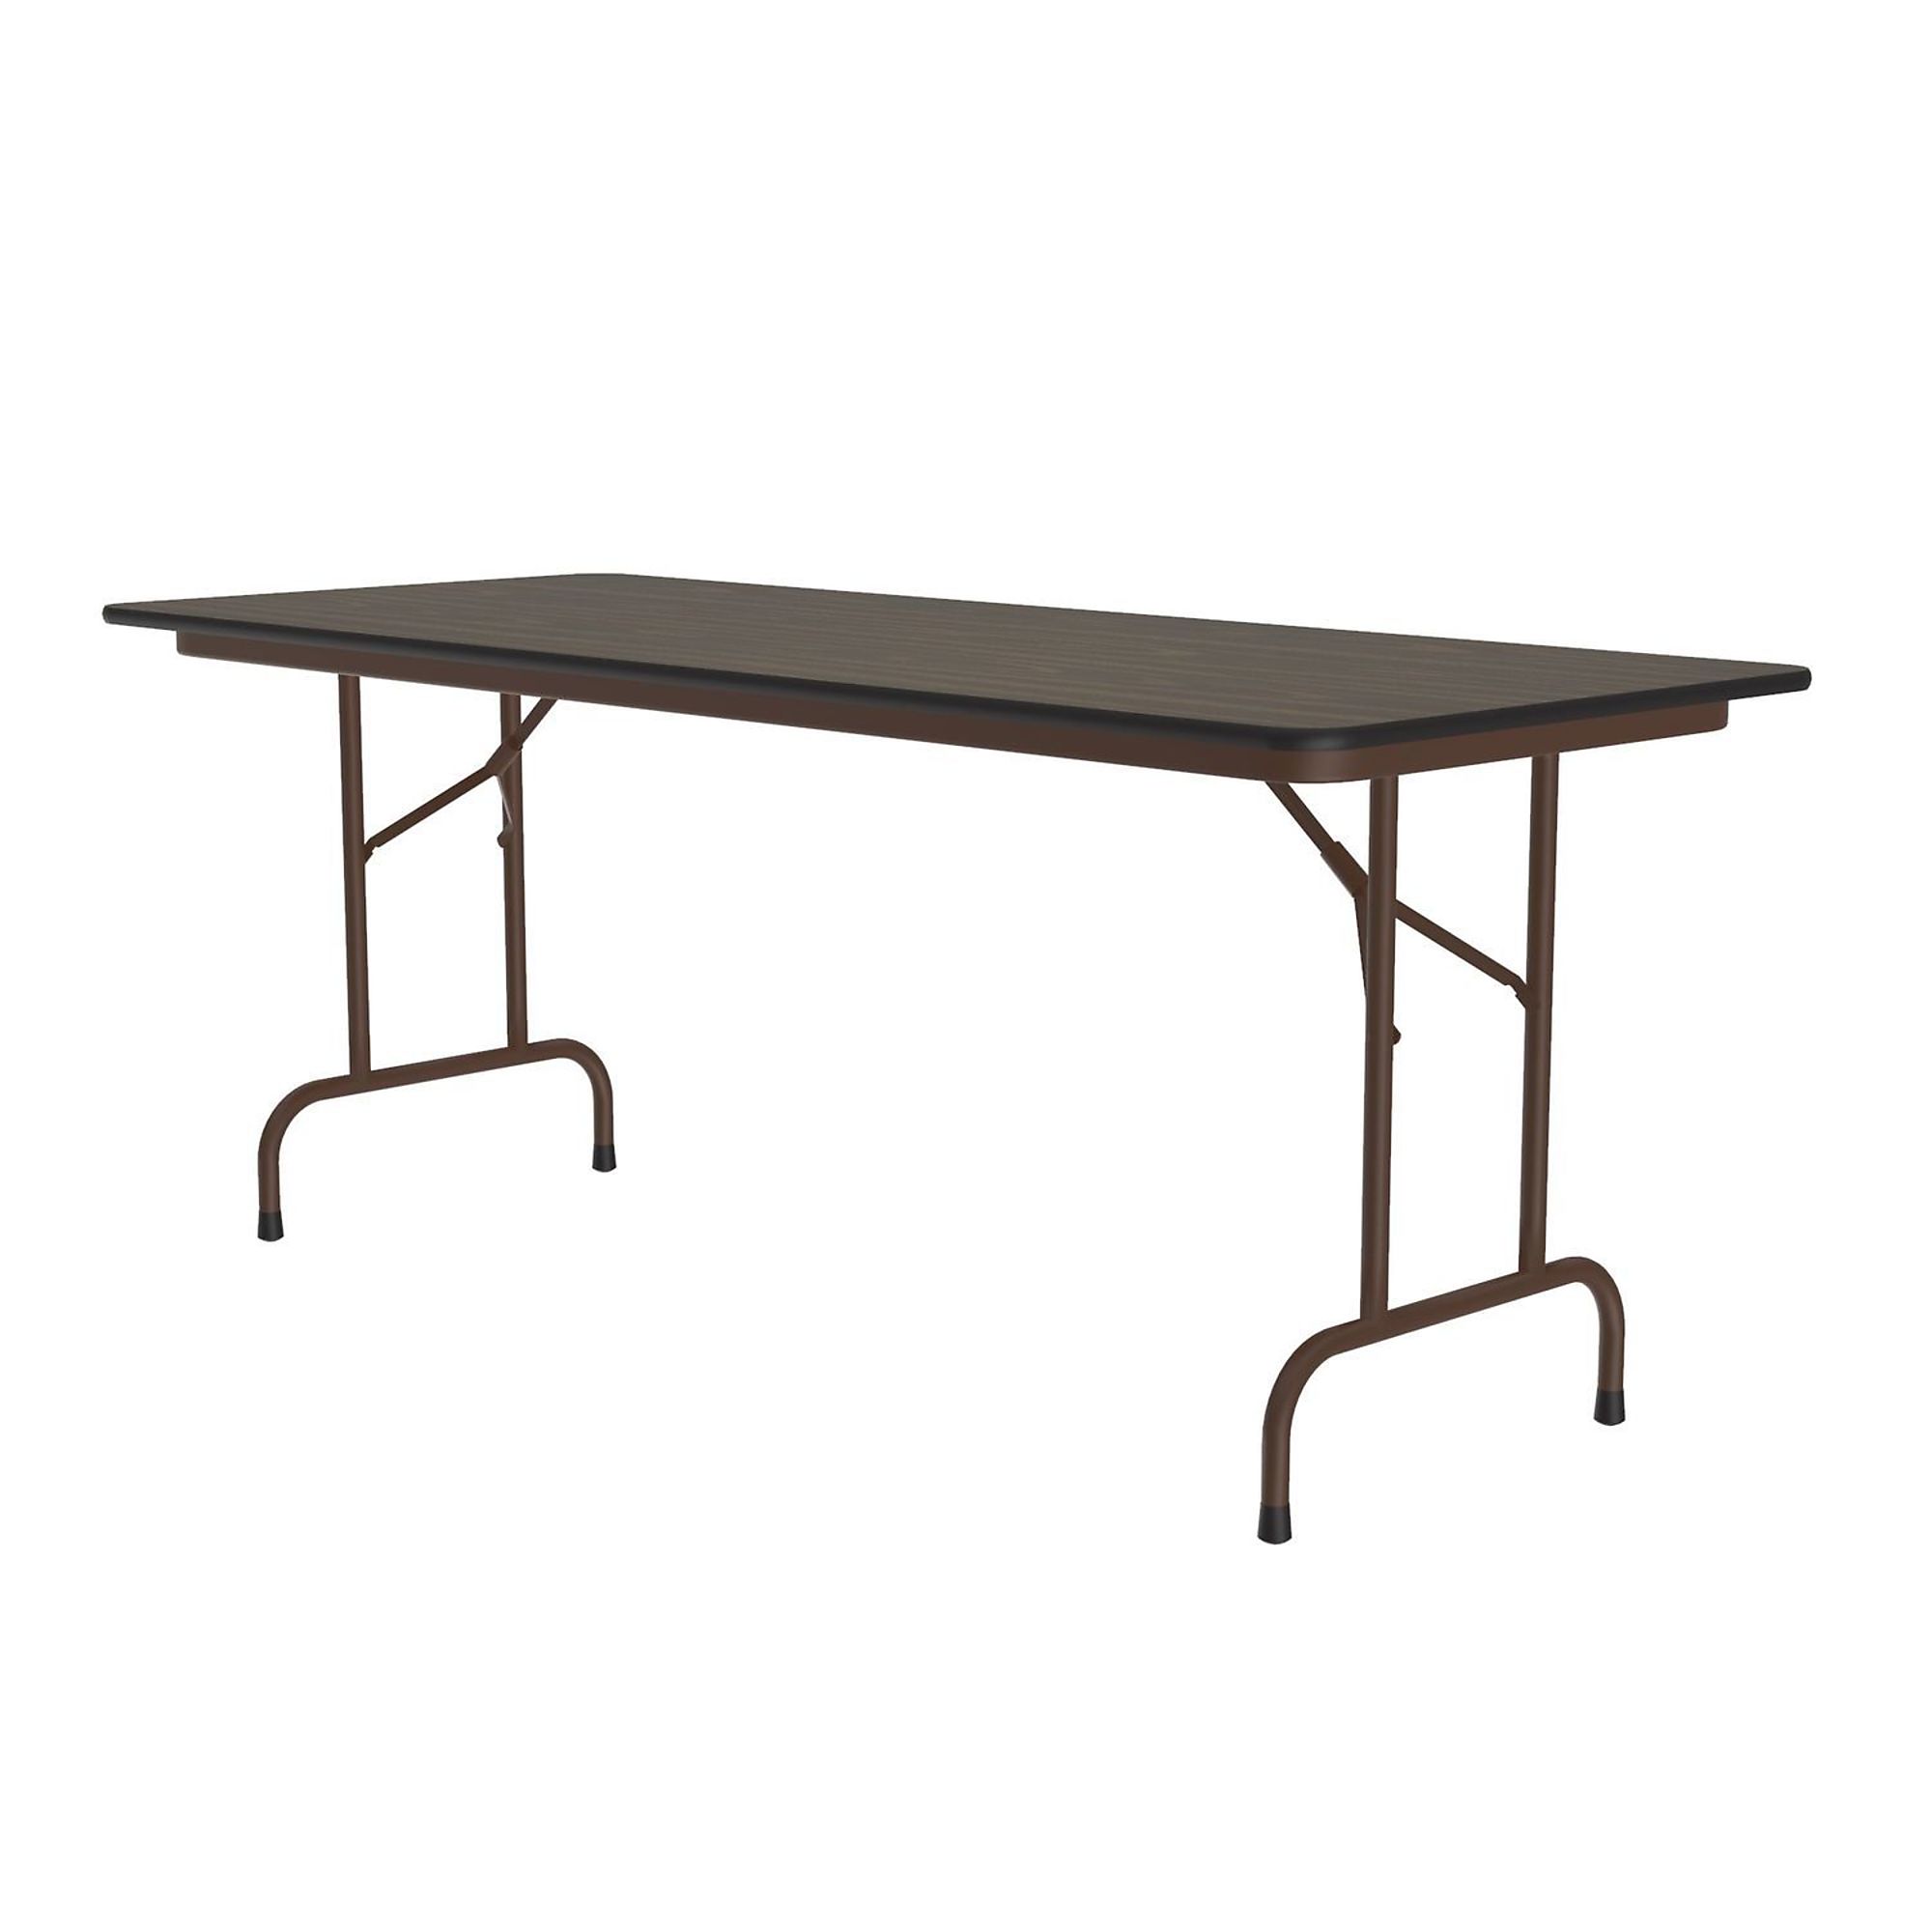 Correll, Commercial TFL Folding Table, Walnut, 30x60, Height 29 in, Width 30 in, Length 60 in, Model CF3060TF-01